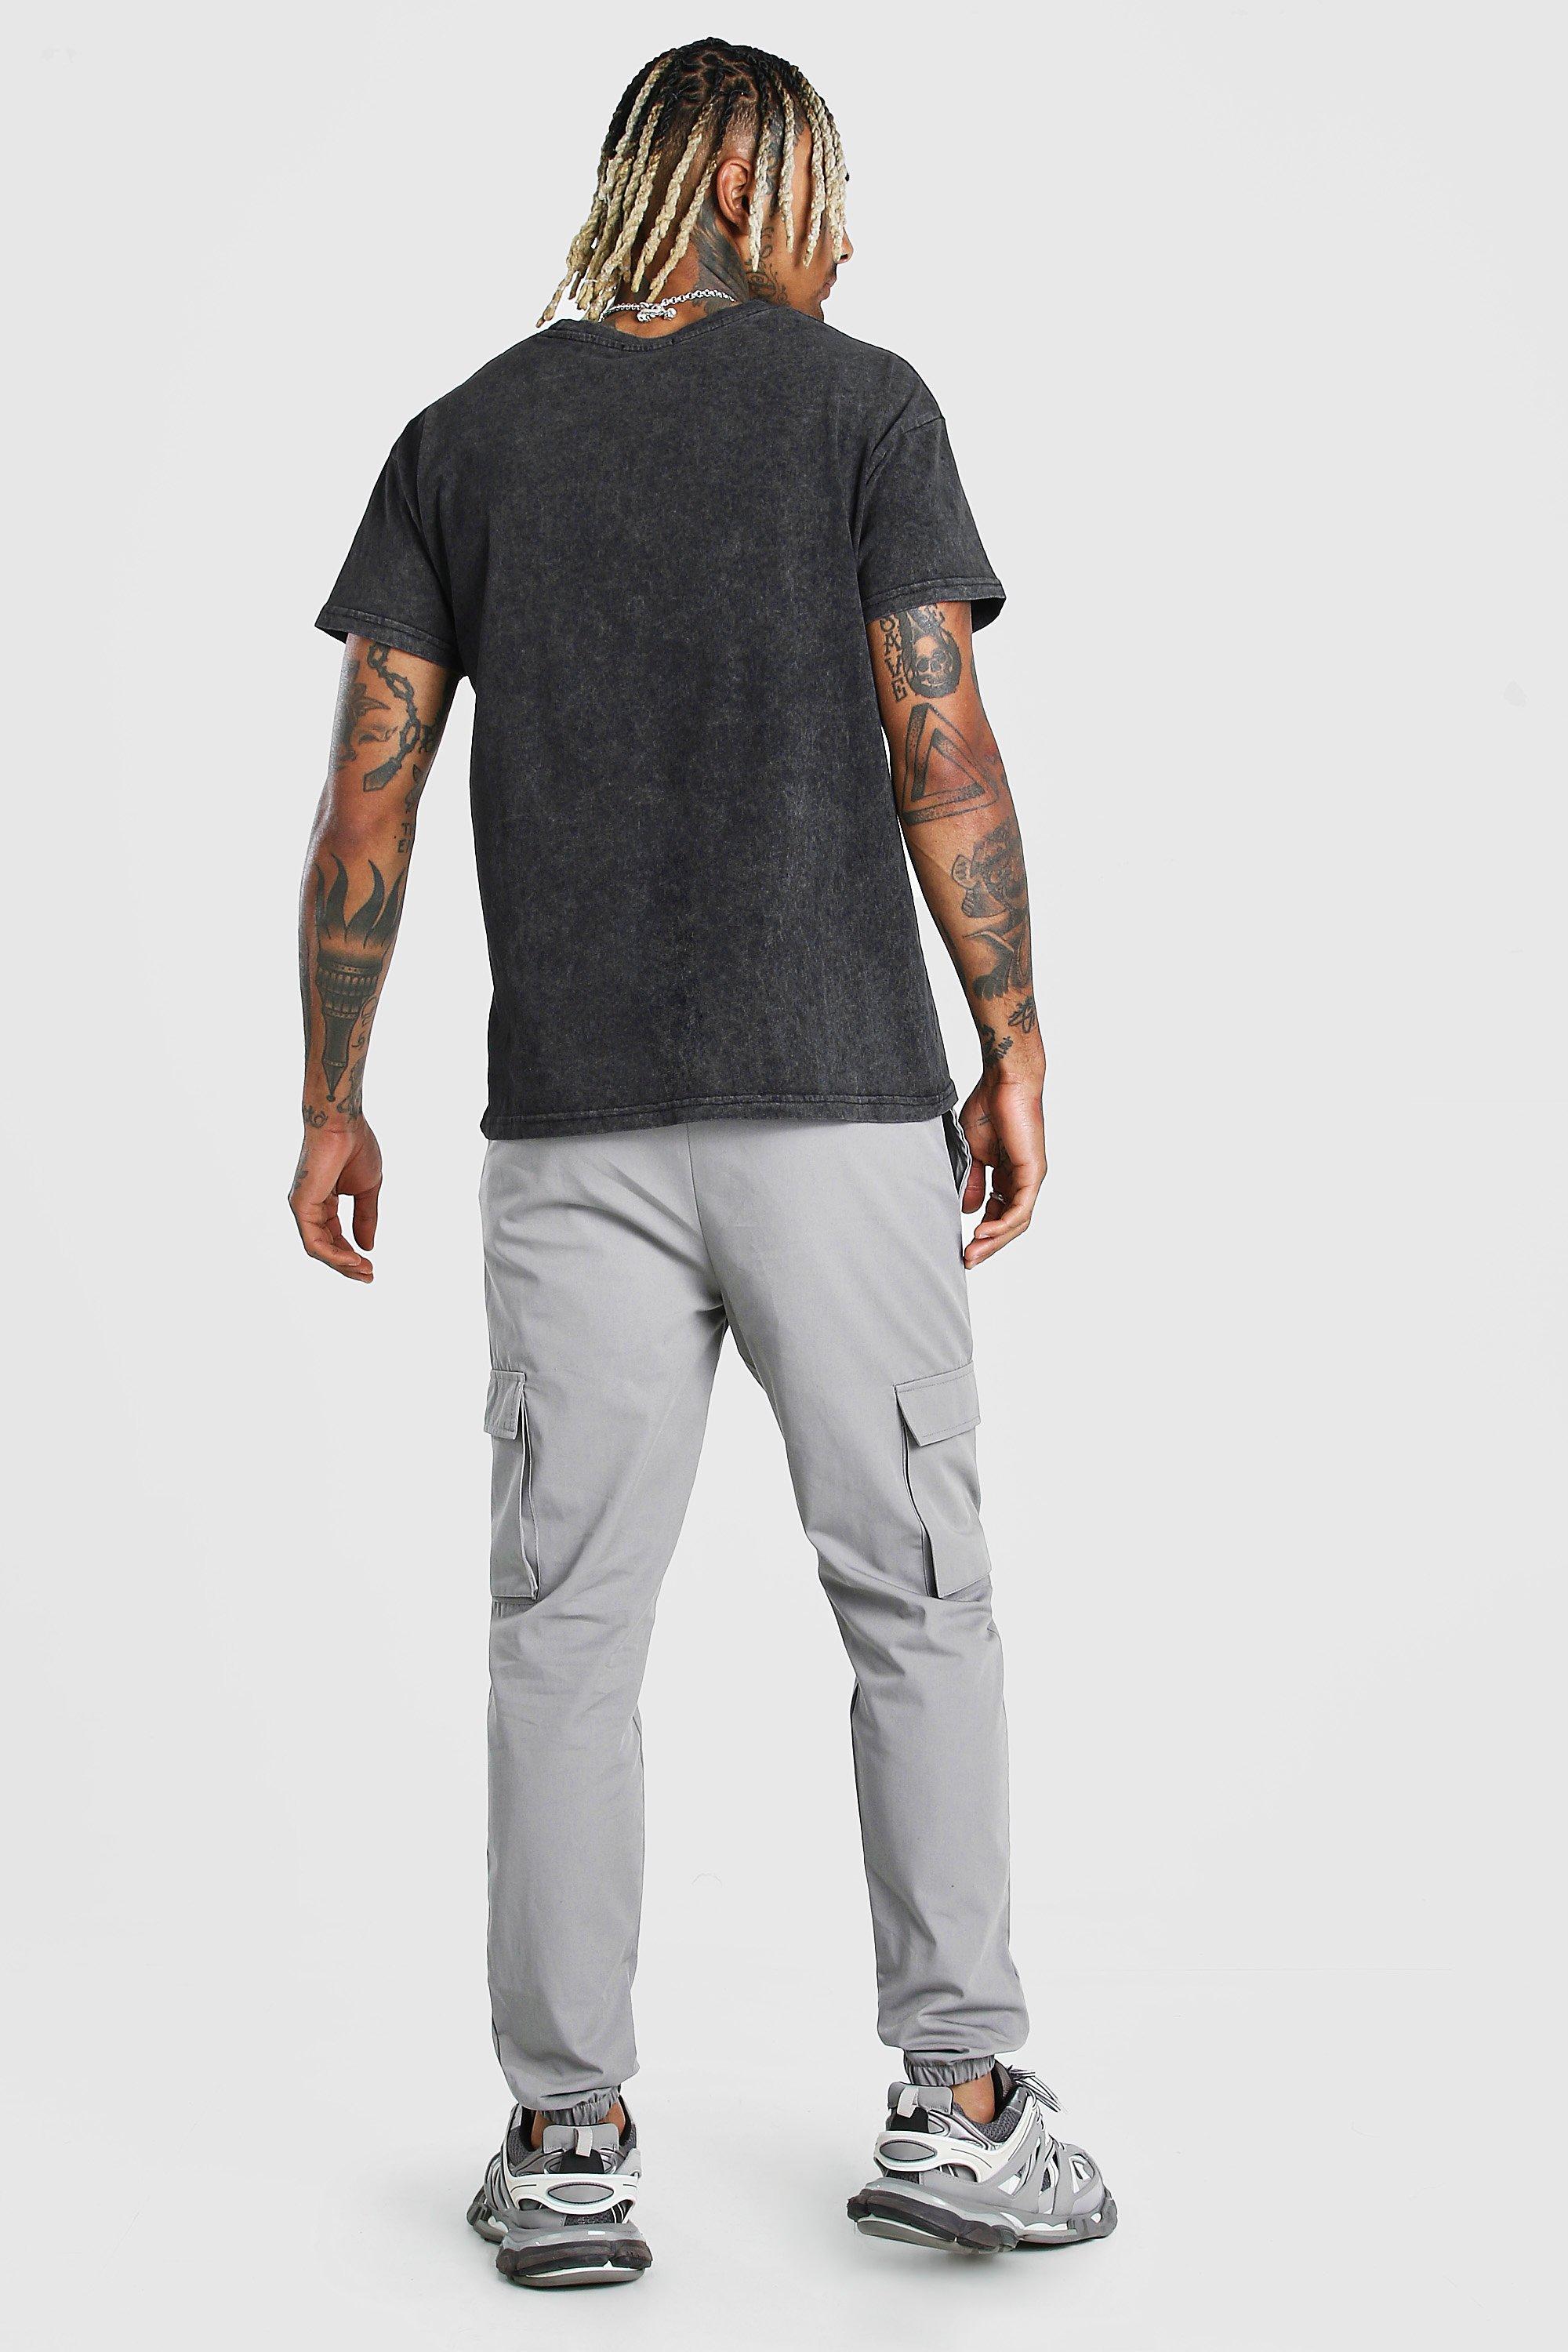 BoohooMAN Utility Pocket Cargo Jogger Pants in Grey (Gray) for Men - Lyst